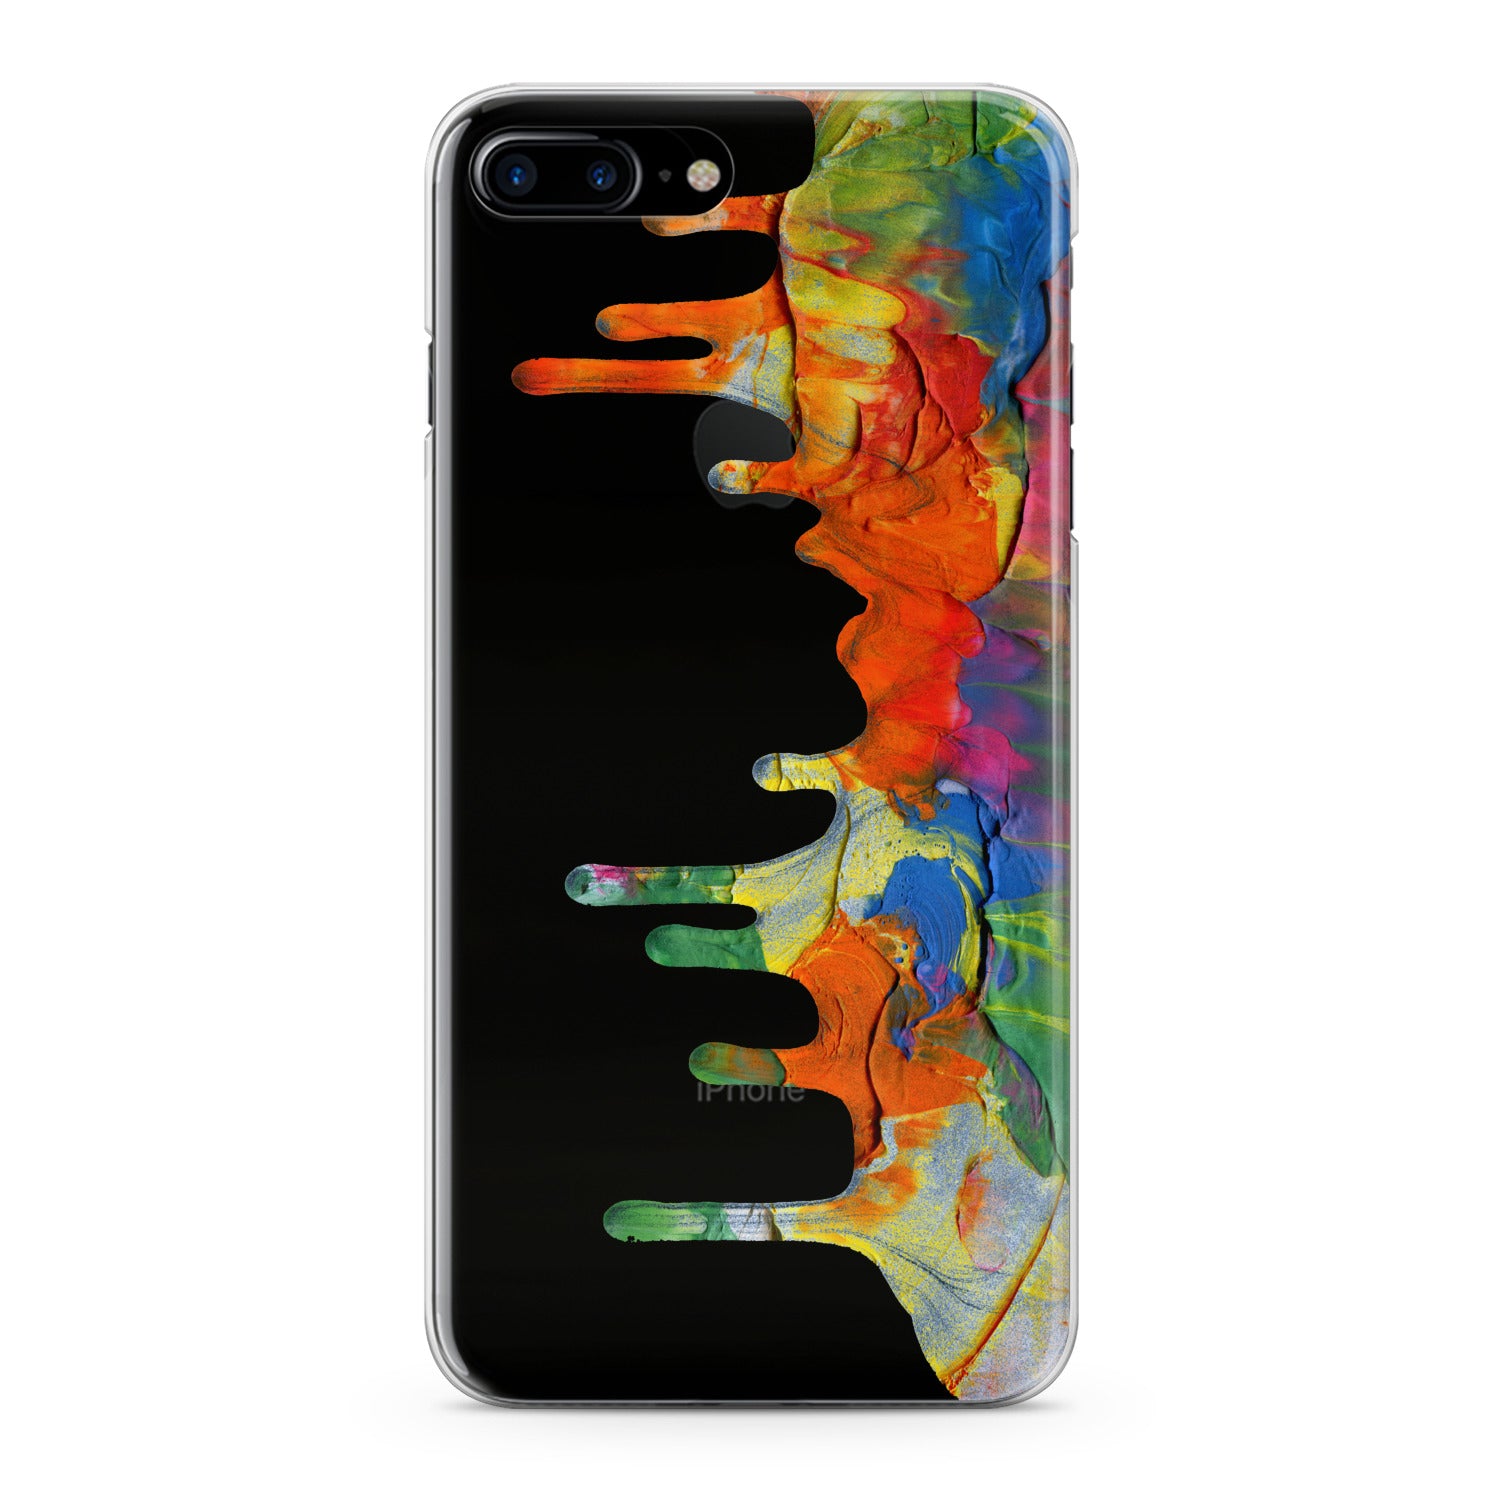 Lex Altern Watercolor Print Phone Case for your iPhone & Android phone.